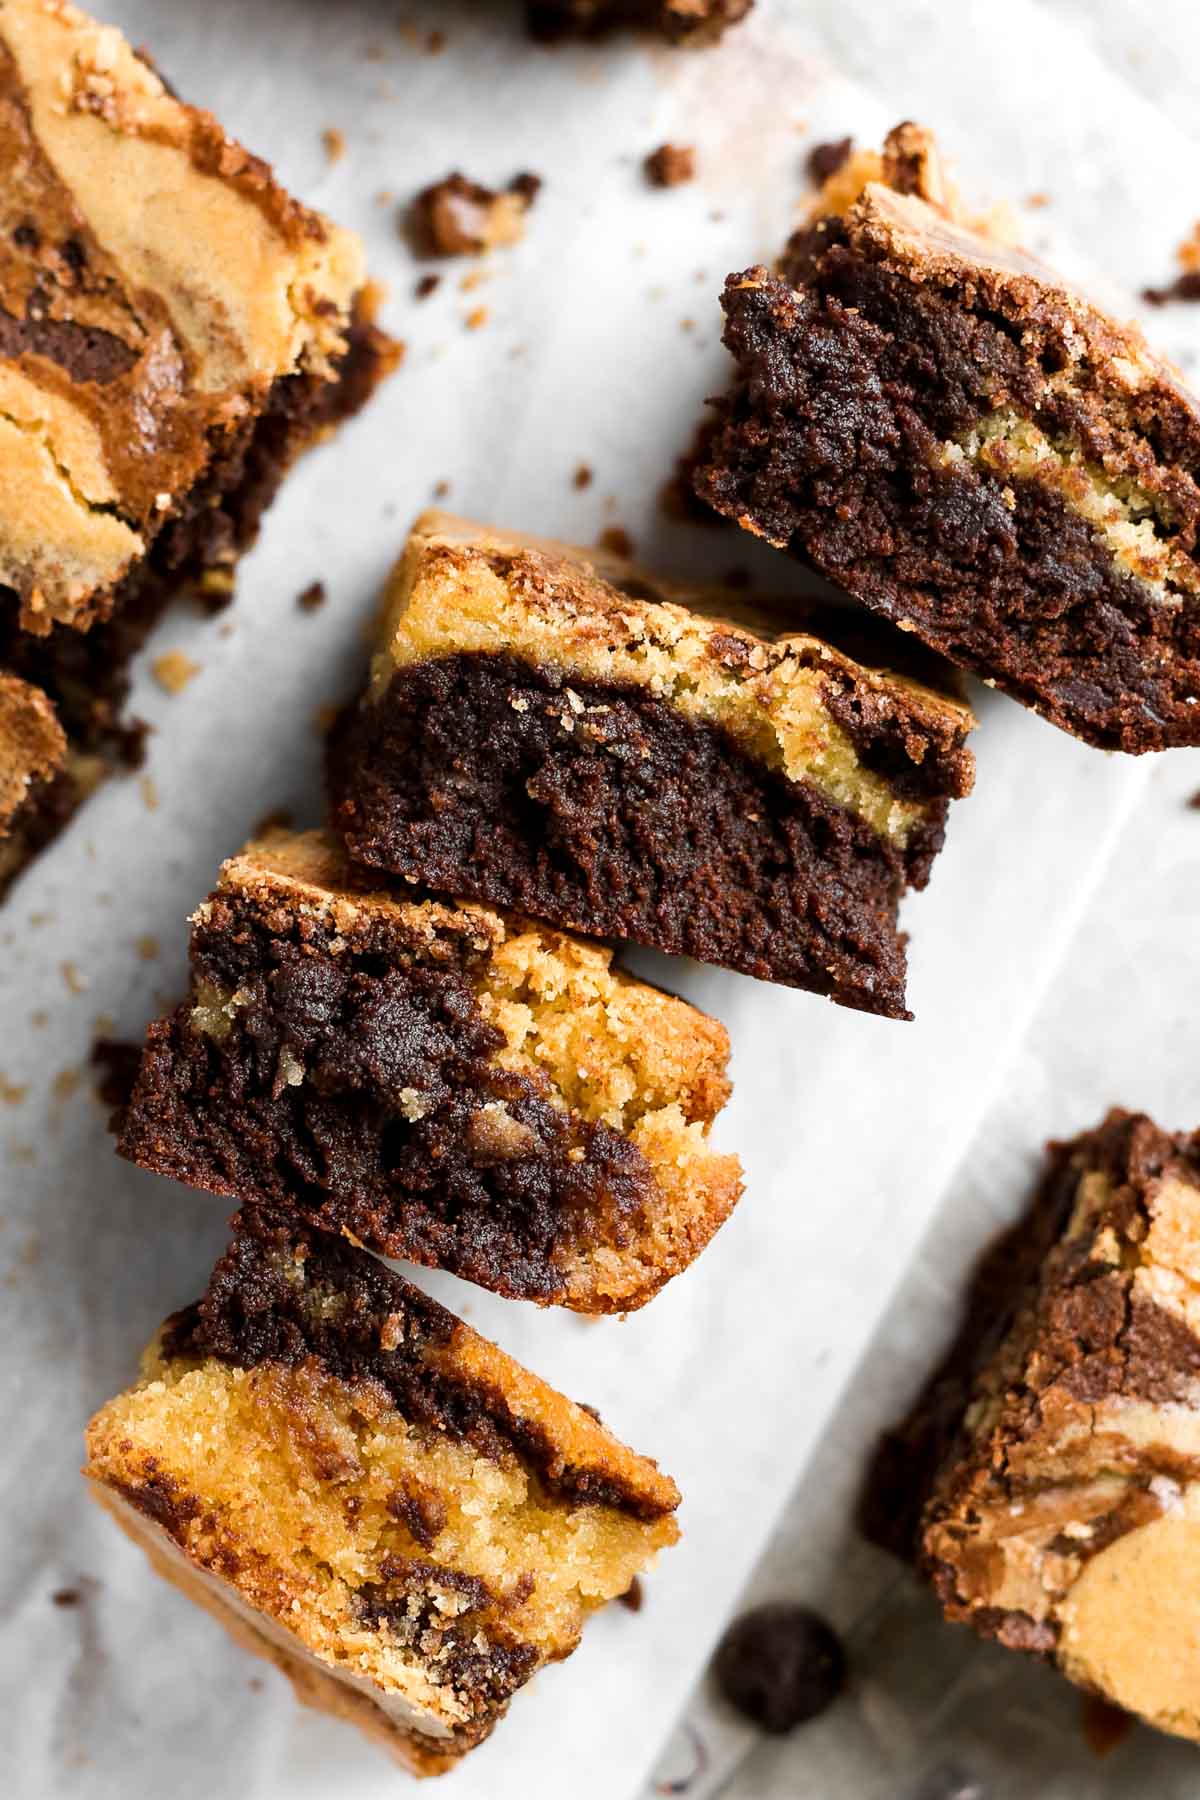 four brownie blondies shown together on their side, showcasing the layers of brownies and blondies.